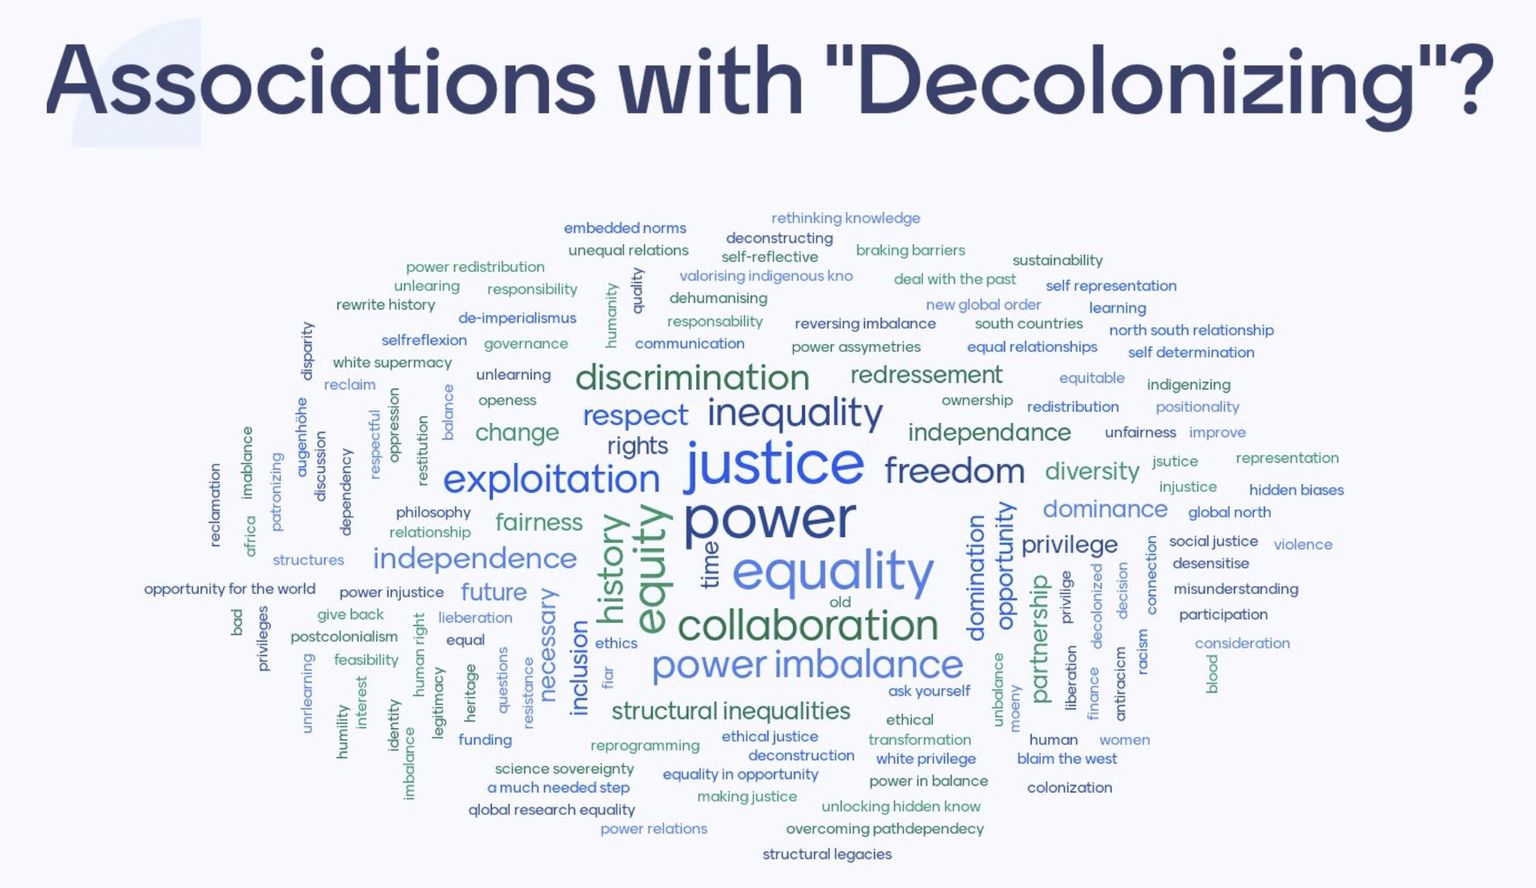 Associations with Decolonizing